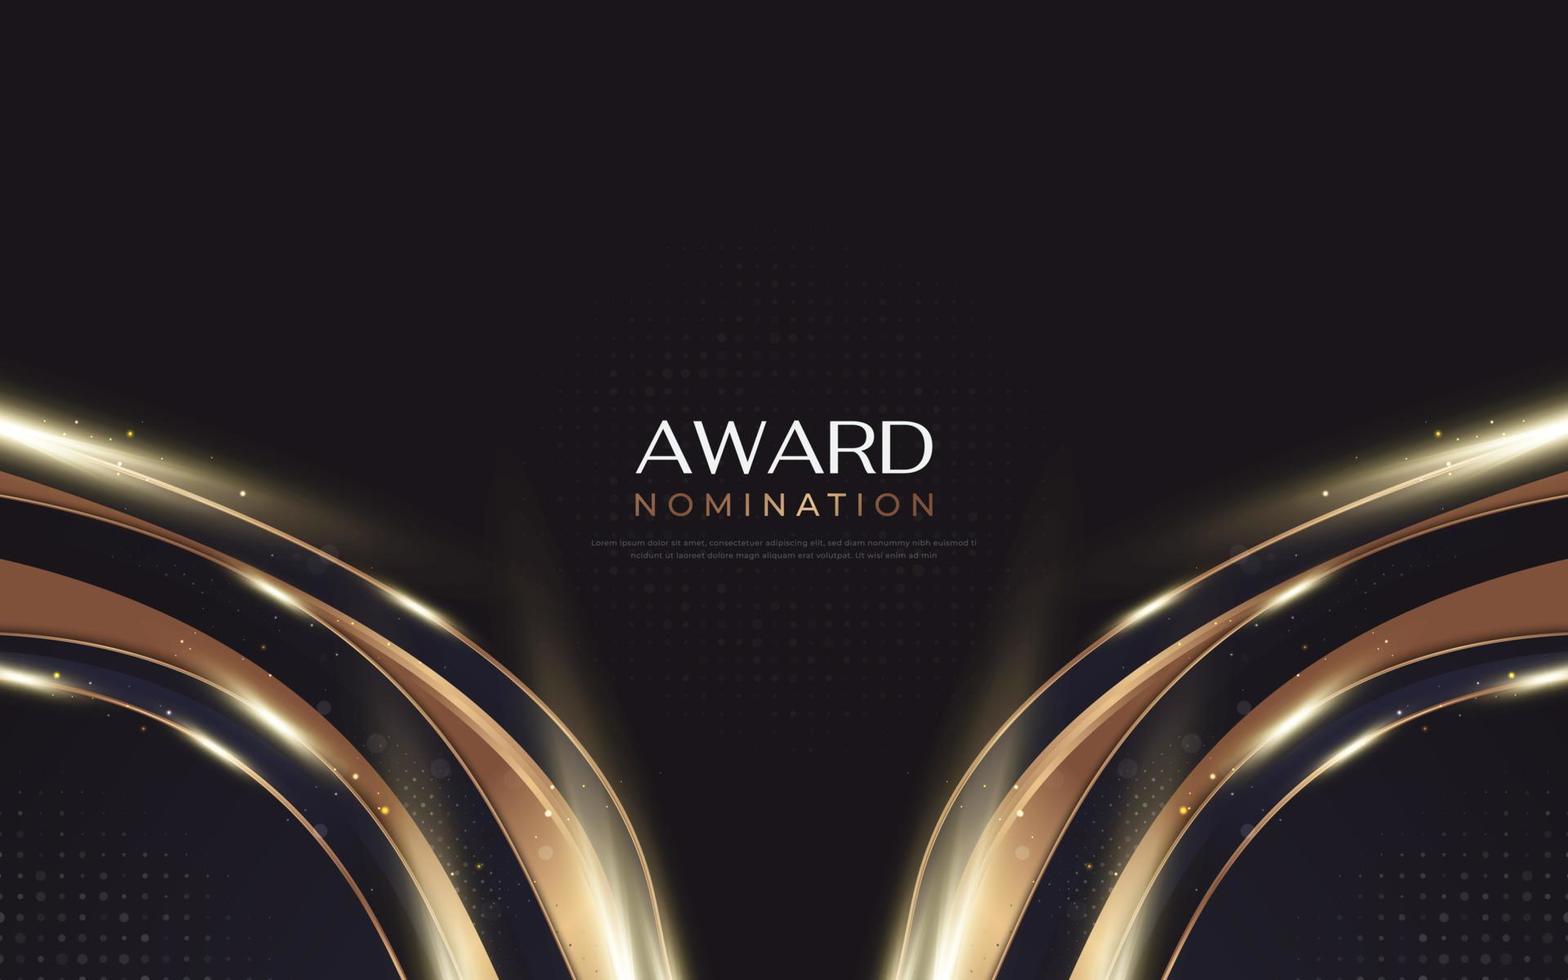 Luxurious and Elegant Blue and Gold Wavy Background with Golden Lines and Glowing Light. Can be Used for Award, Banner, Card, Nomination, Ceremony, Formal Invitation or Certificate Design vector